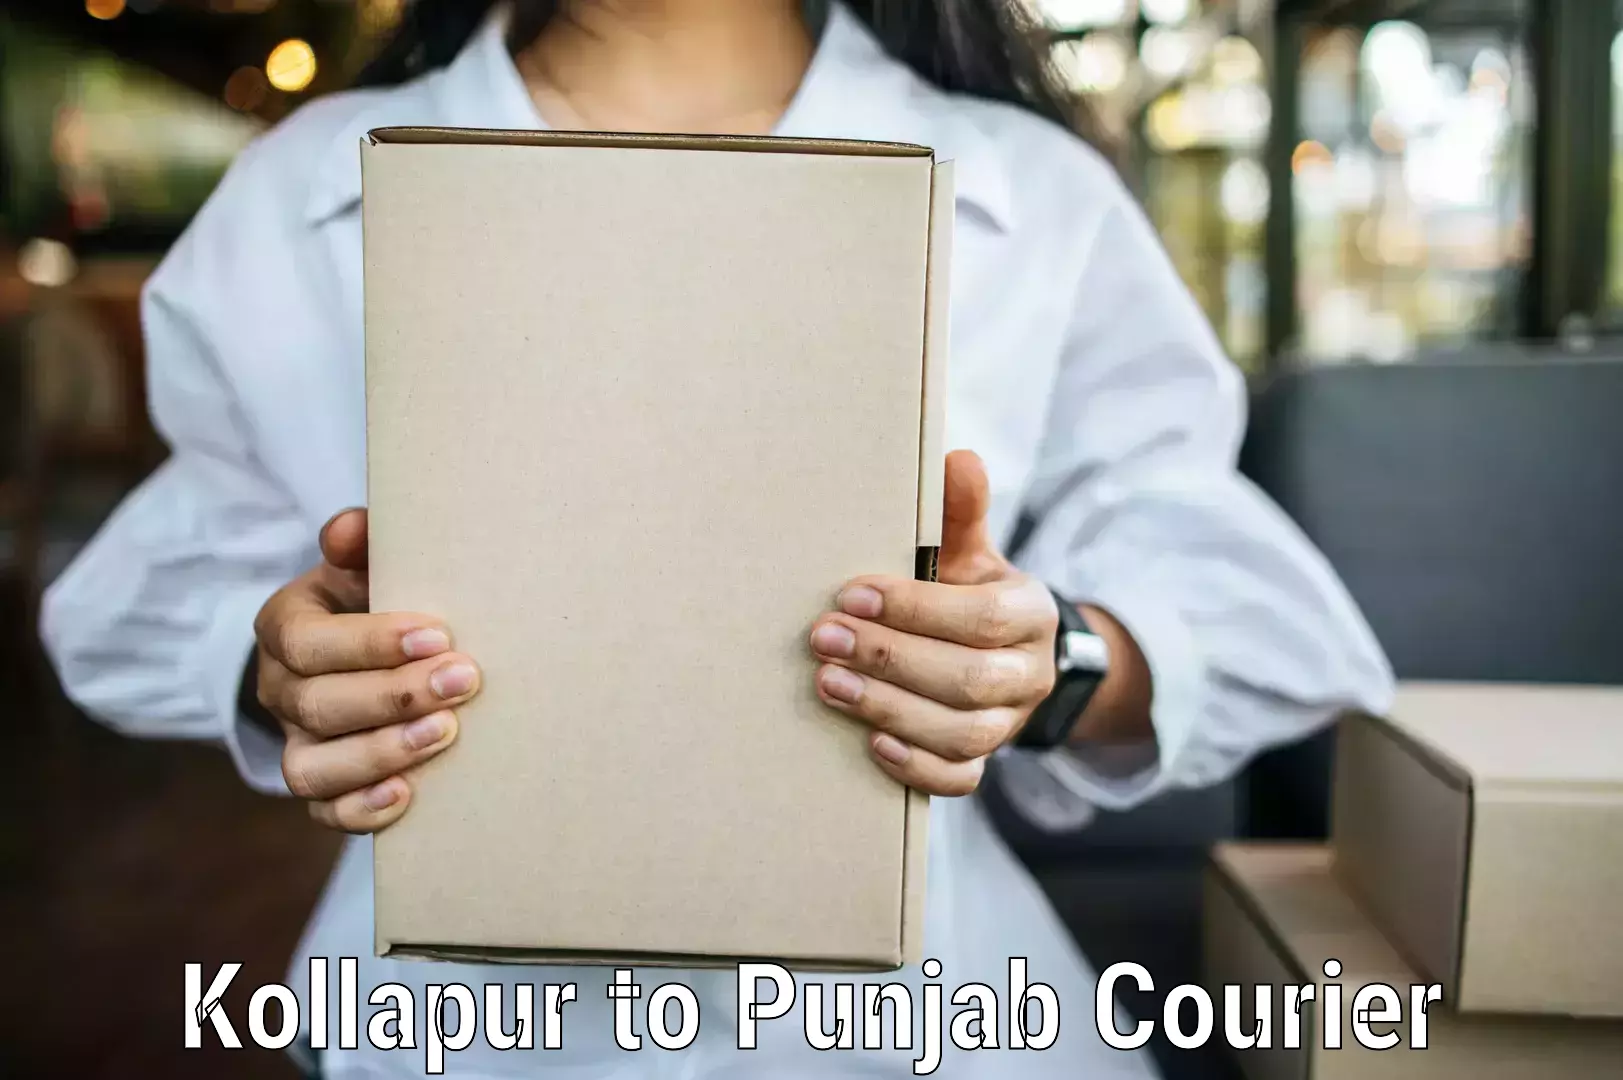 Round-the-clock parcel delivery Kollapur to Ropar